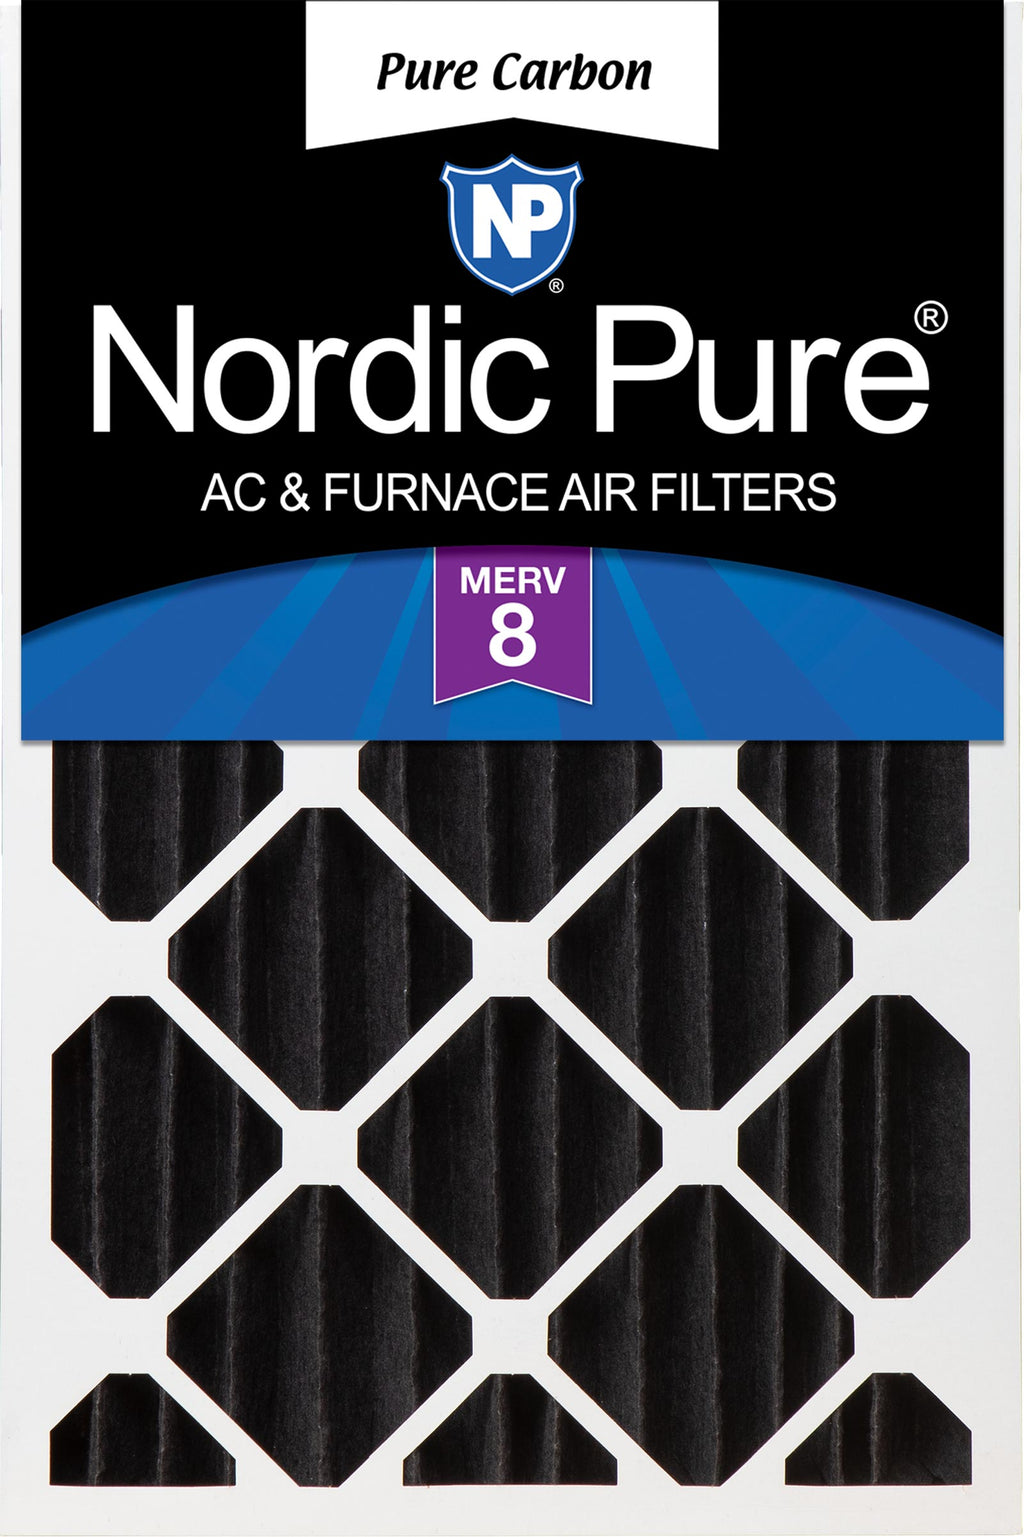 16x25x4 (3 5/8) Pure Carbon Pleated Odor Reduction Merv 8 Furnace Filter